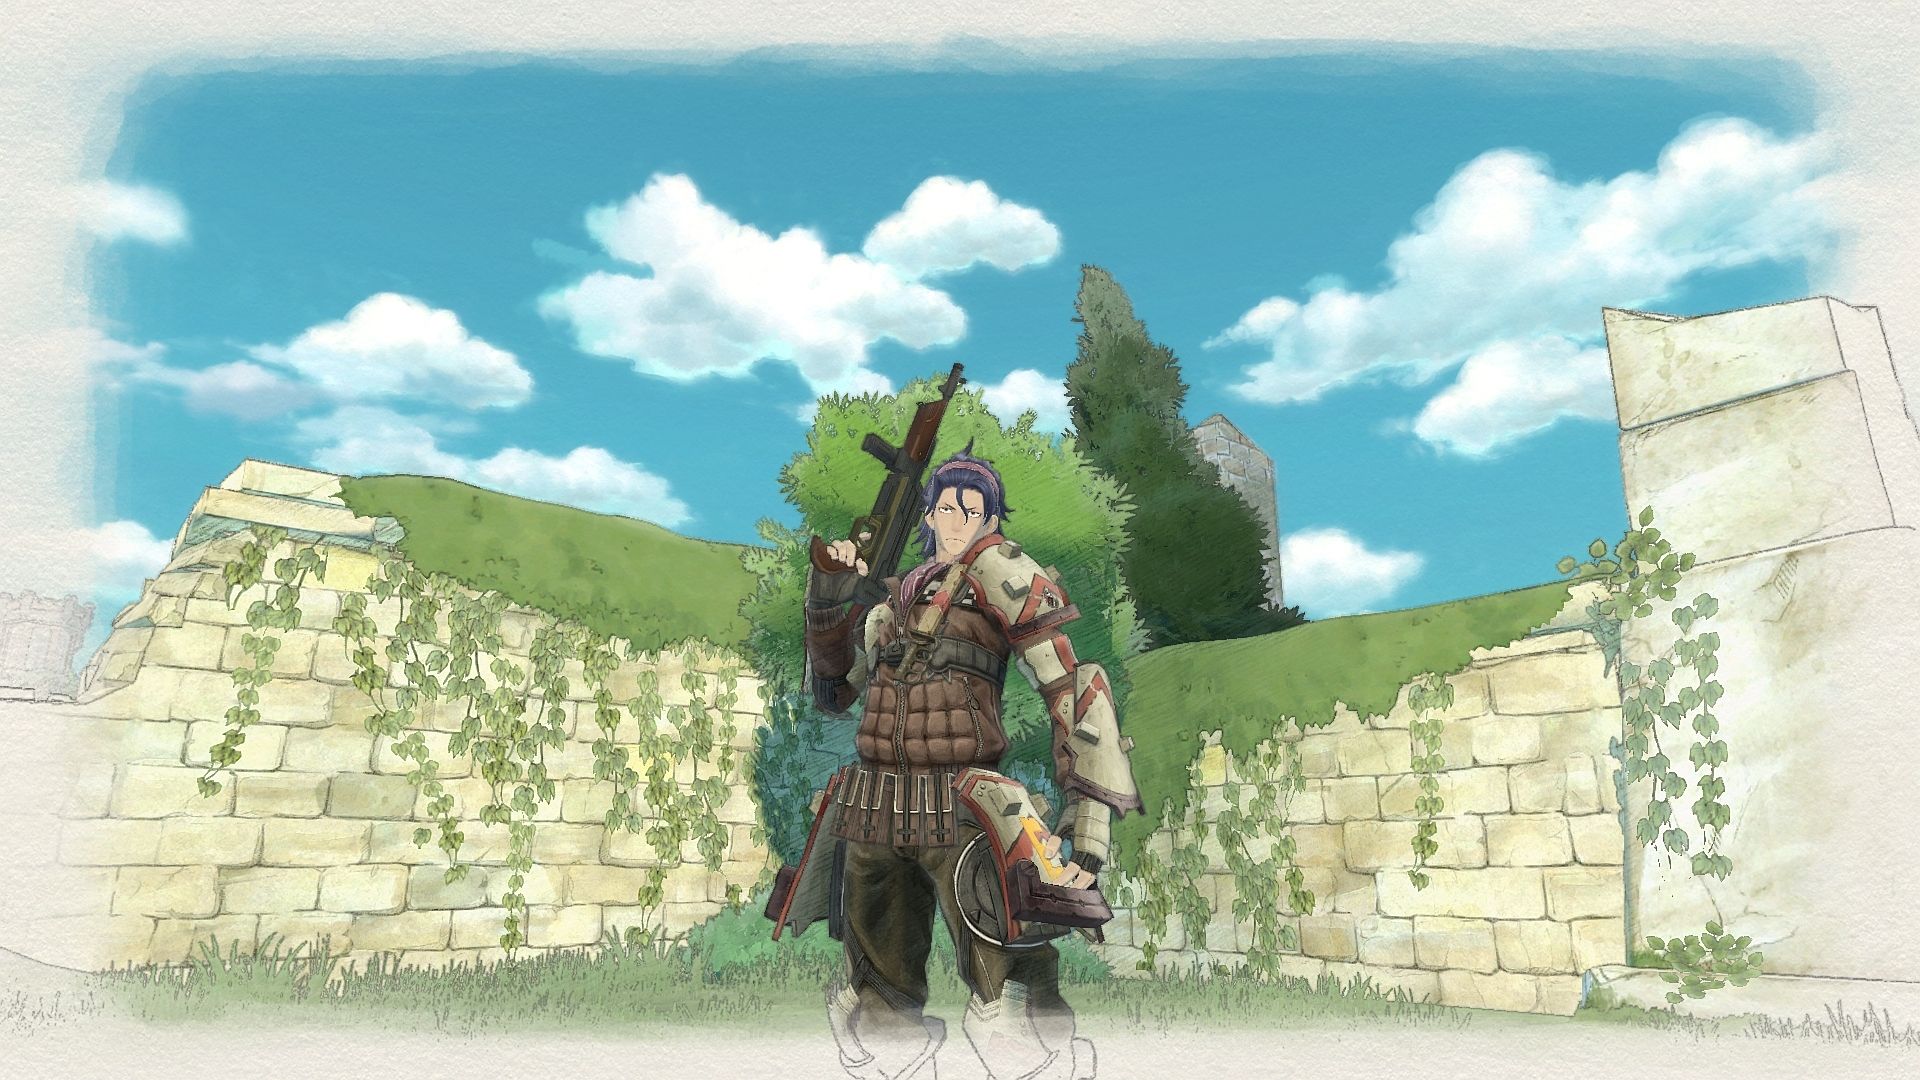 http://www.perfectly-nintendo.com/wp-content/gallery/valkyria-chronicles-4-27-12-2017/36.jpg